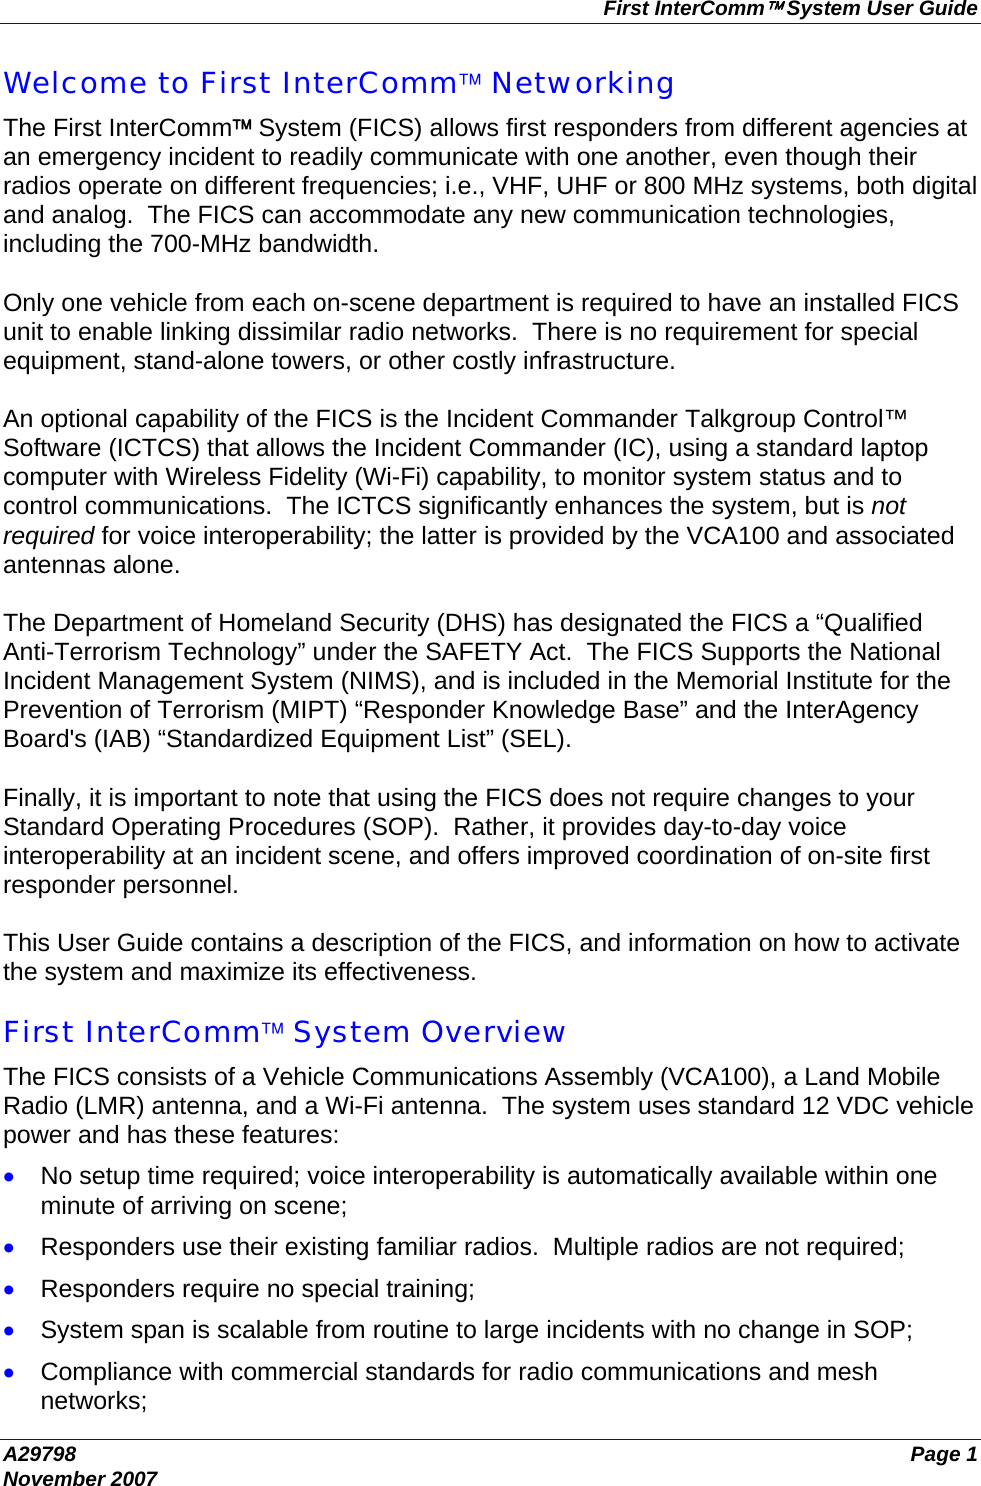 First InterComm™ System User Guide A29798  Page 1 November 2007 Welcome to First InterComm™ Networking The First InterComm™ System (FICS) allows first responders from different agencies at an emergency incident to readily communicate with one another, even though their radios operate on different frequencies; i.e., VHF, UHF or 800 MHz systems, both digital and analog.  The FICS can accommodate any new communication technologies, including the 700-MHz bandwidth.  Only one vehicle from each on-scene department is required to have an installed FICS unit to enable linking dissimilar radio networks.  There is no requirement for special equipment, stand-alone towers, or other costly infrastructure.  An optional capability of the FICS is the Incident Commander Talkgroup Control™ Software (ICTCS) that allows the Incident Commander (IC), using a standard laptop computer with Wireless Fidelity (Wi-Fi) capability, to monitor system status and to control communications.  The ICTCS significantly enhances the system, but is not required for voice interoperability; the latter is provided by the VCA100 and associated antennas alone.  The Department of Homeland Security (DHS) has designated the FICS a “Qualified Anti-Terrorism Technology” under the SAFETY Act.  The FICS Supports the National Incident Management System (NIMS), and is included in the Memorial Institute for the Prevention of Terrorism (MIPT) “Responder Knowledge Base” and the InterAgency Board&apos;s (IAB) “Standardized Equipment List” (SEL).  Finally, it is important to note that using the FICS does not require changes to your Standard Operating Procedures (SOP).  Rather, it provides day-to-day voice interoperability at an incident scene, and offers improved coordination of on-site first responder personnel.  This User Guide contains a description of the FICS, and information on how to activate the system and maximize its effectiveness.  First InterComm™ System Overview The FICS consists of a Vehicle Communications Assembly (VCA100), a Land Mobile Radio (LMR) antenna, and a Wi-Fi antenna.  The system uses standard 12 VDC vehicle power and has these features: • No setup time required; voice interoperability is automatically available within one minute of arriving on scene; • Responders use their existing familiar radios.  Multiple radios are not required; • Responders require no special training; • System span is scalable from routine to large incidents with no change in SOP; • Compliance with commercial standards for radio communications and mesh networks; 